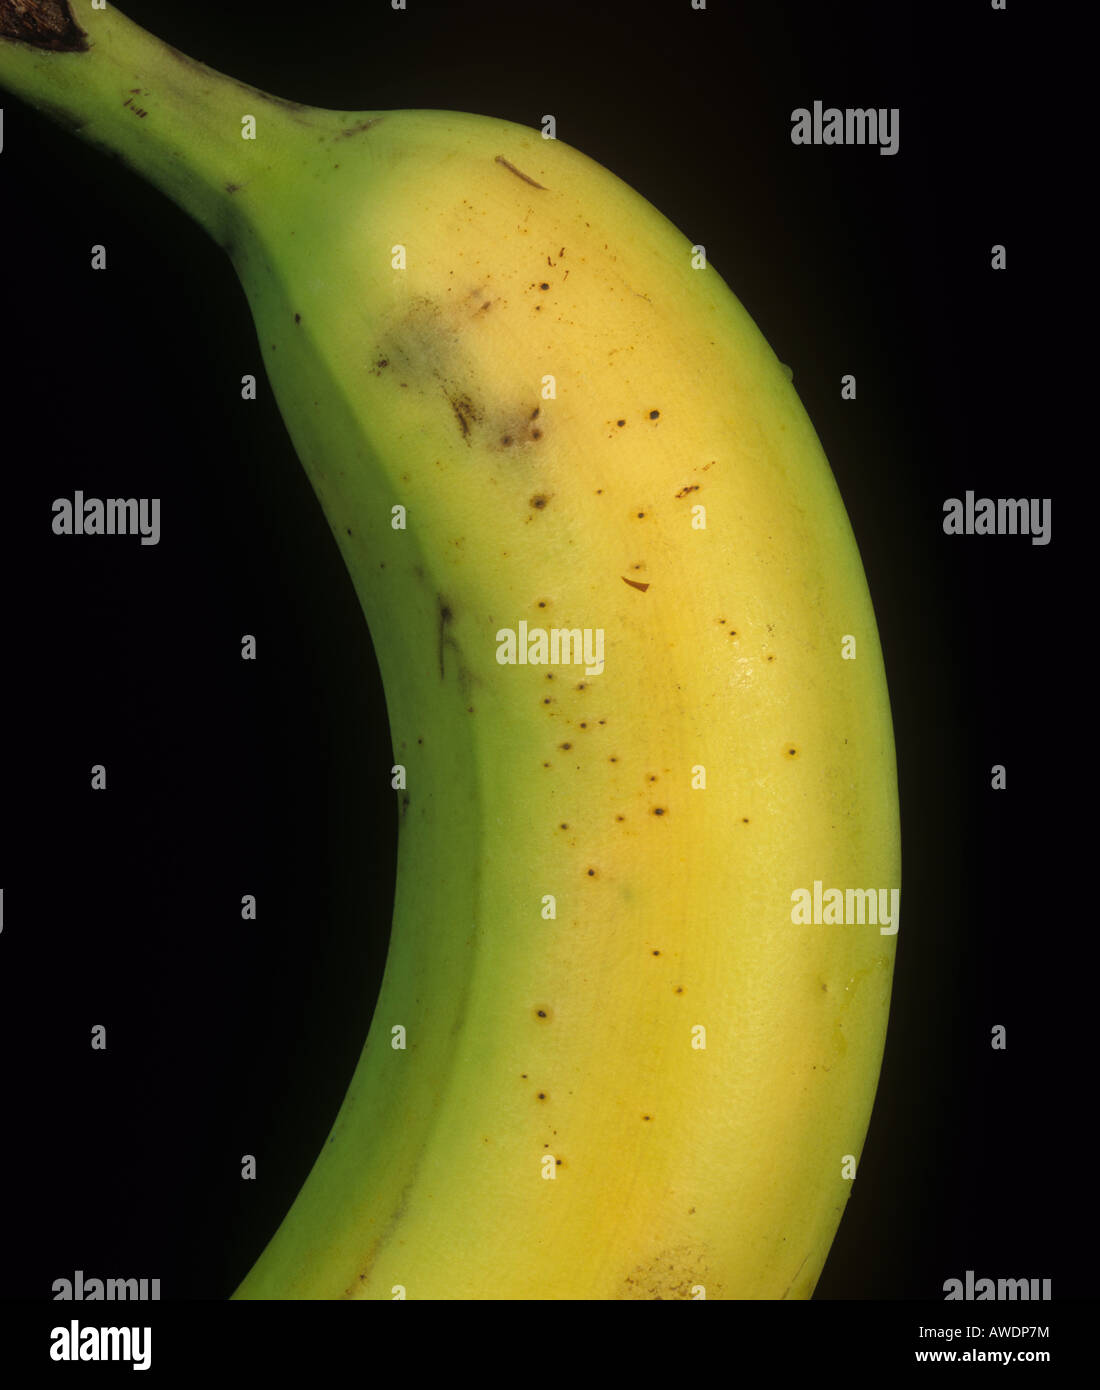 Thrips damage to banana bought from a supermarket Stock Photo